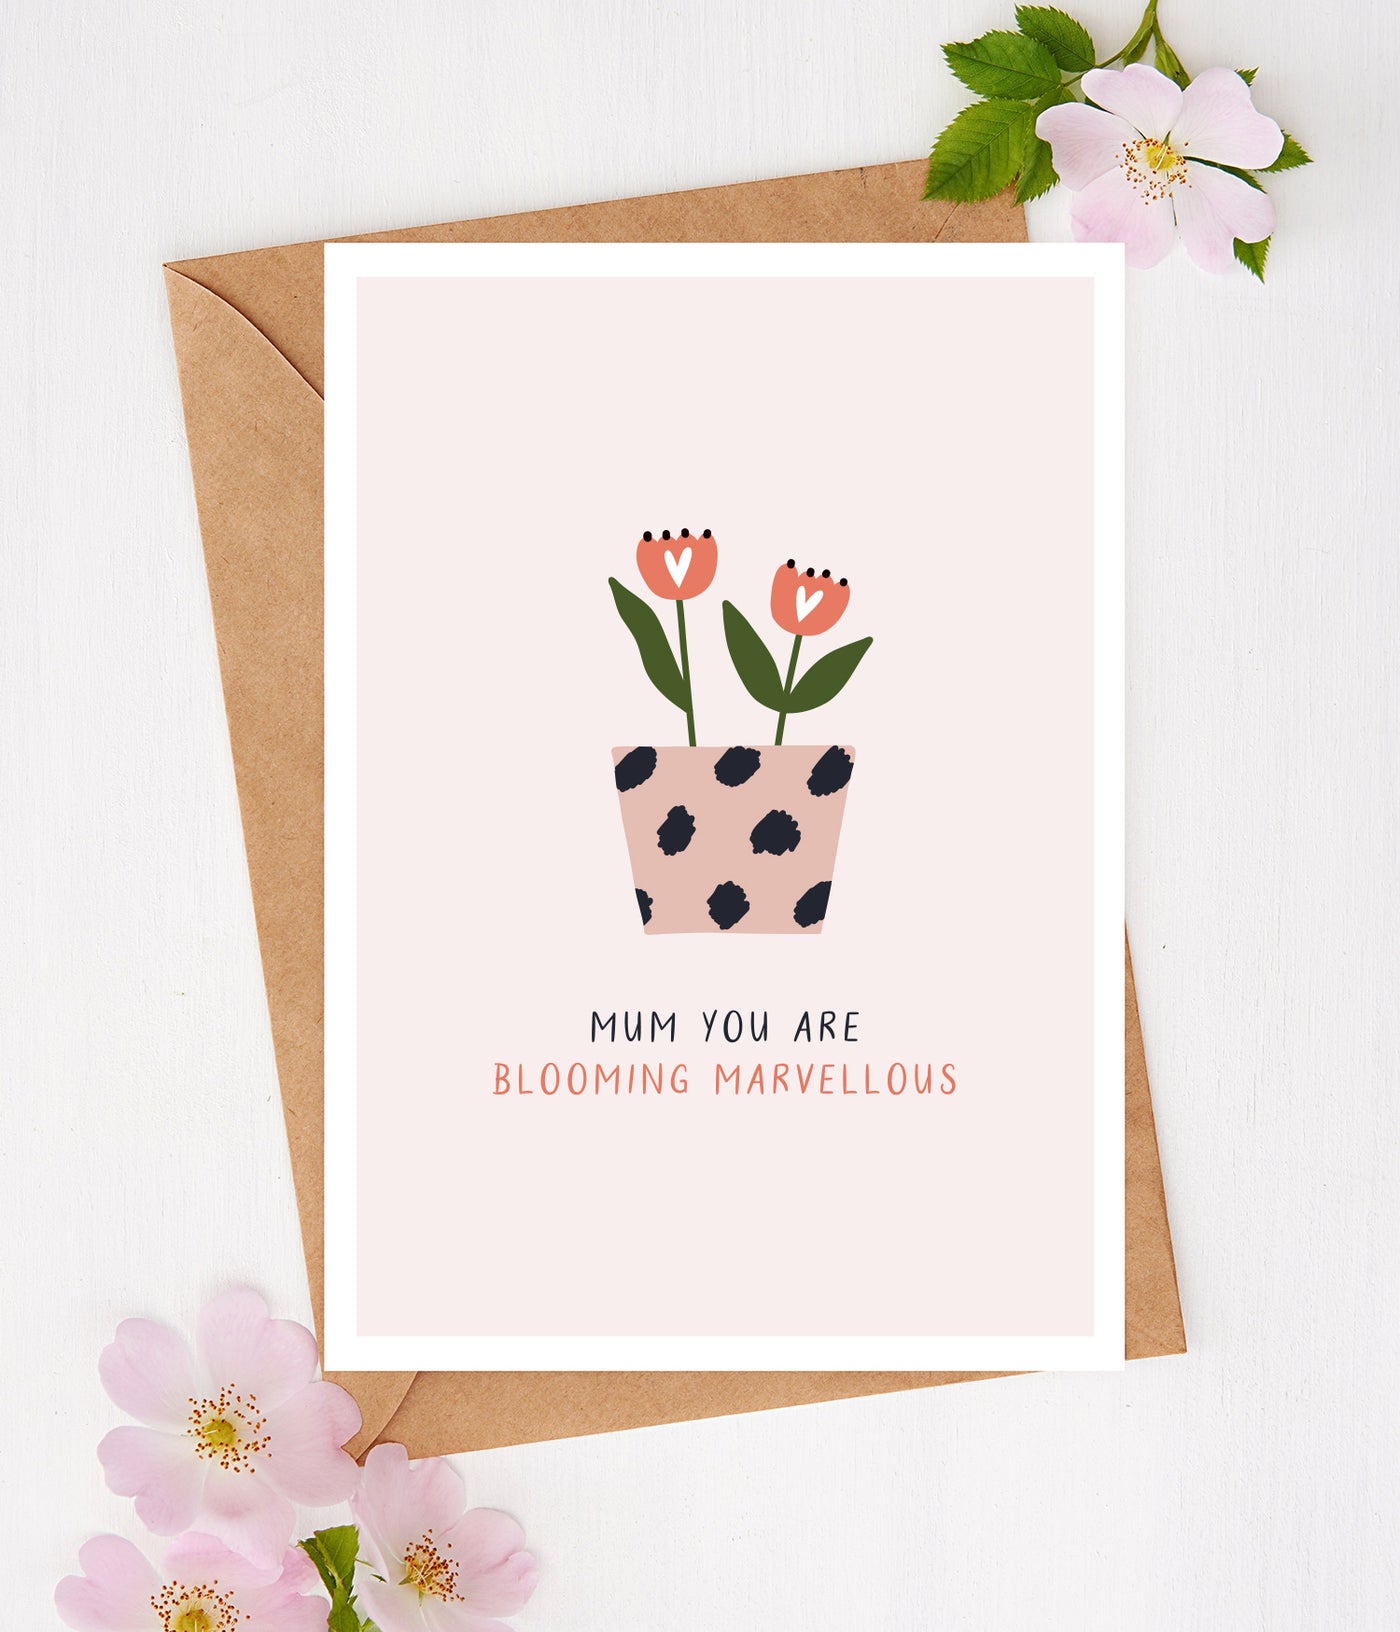 Blooming Marvellous' Mother's Day Card – Slinky Prints